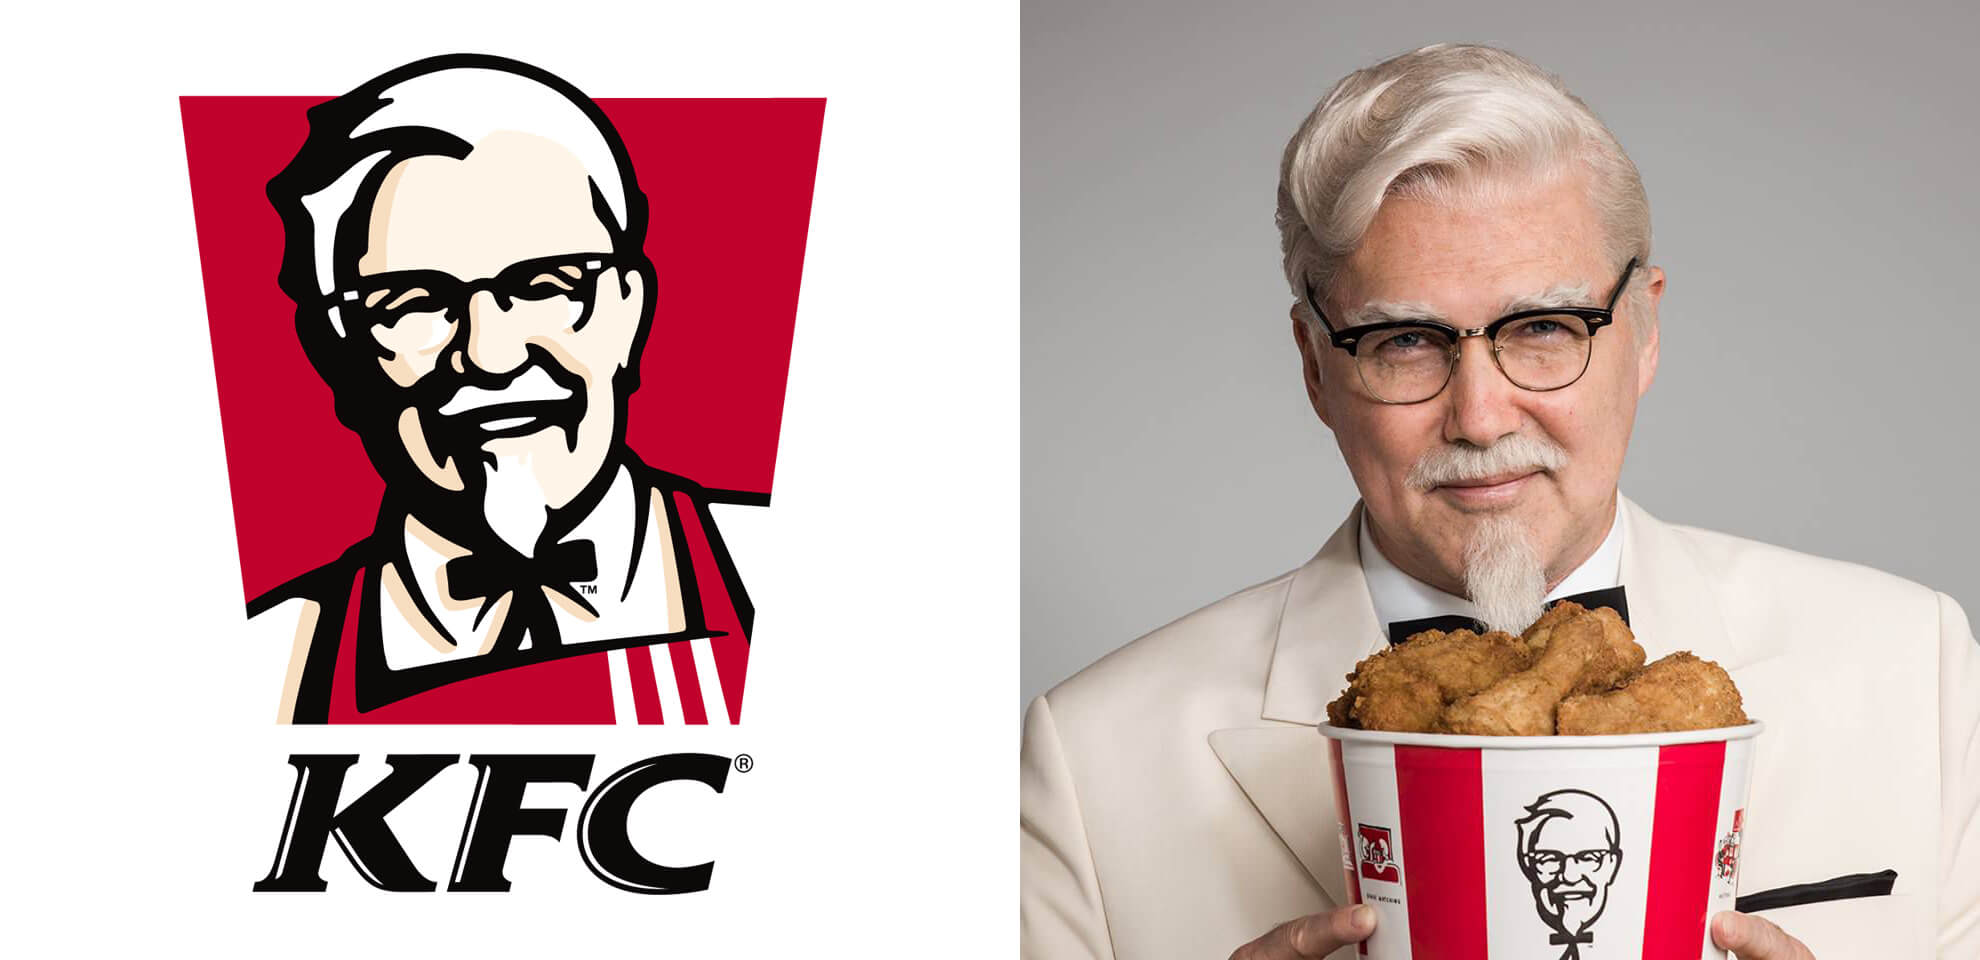 Colonel Sanders from KFC